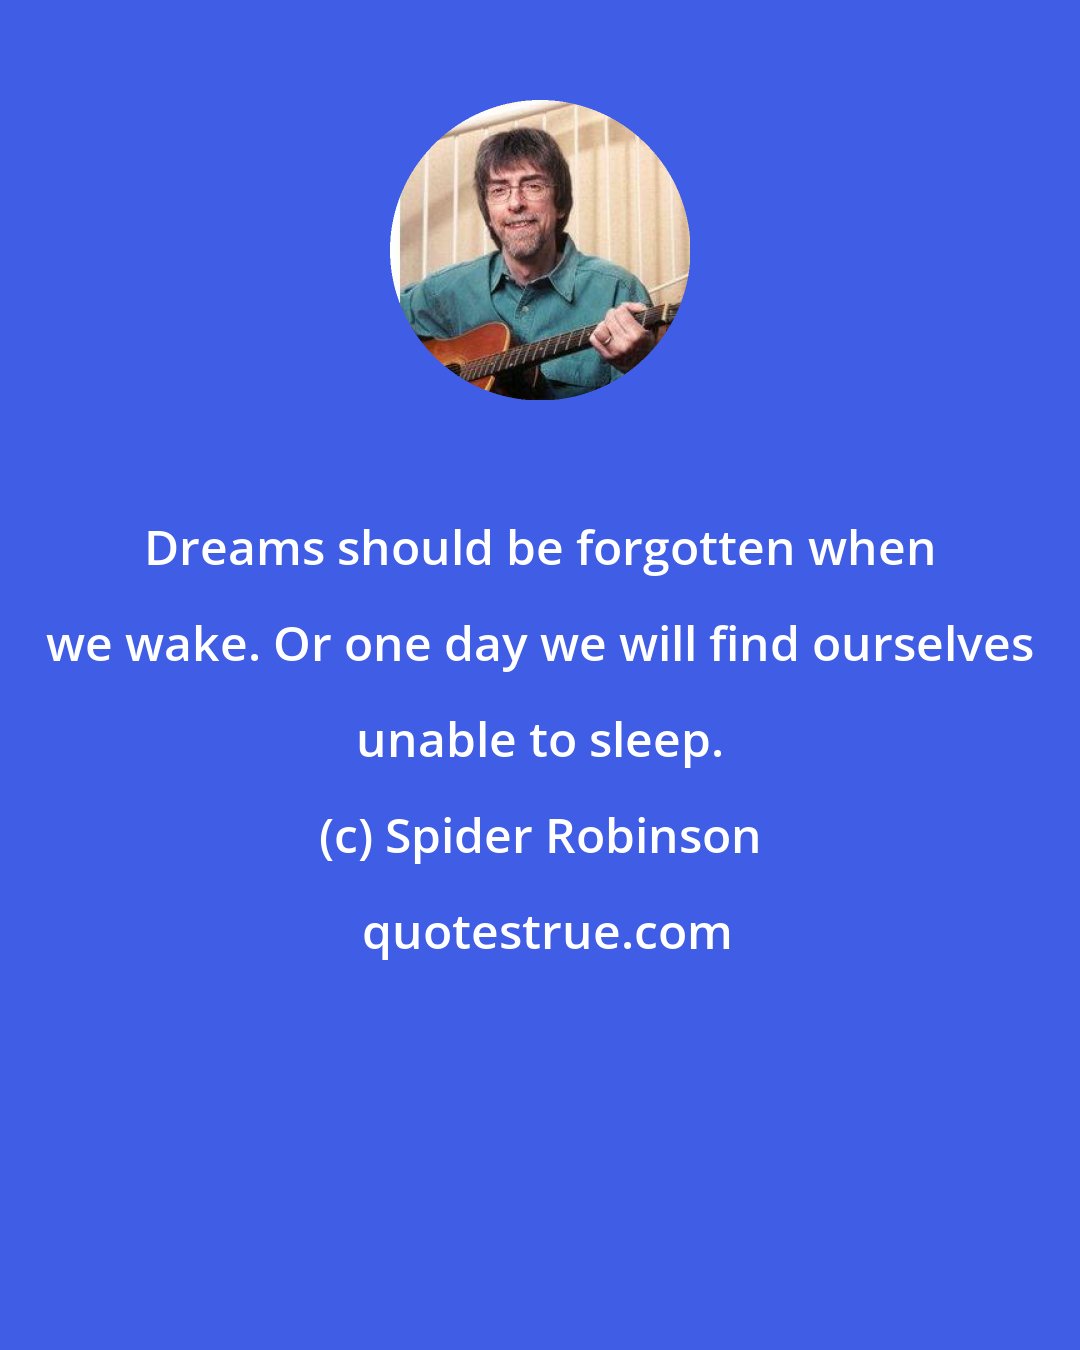 Spider Robinson: Dreams should be forgotten when we wake. Or one day we will find ourselves unable to sleep.